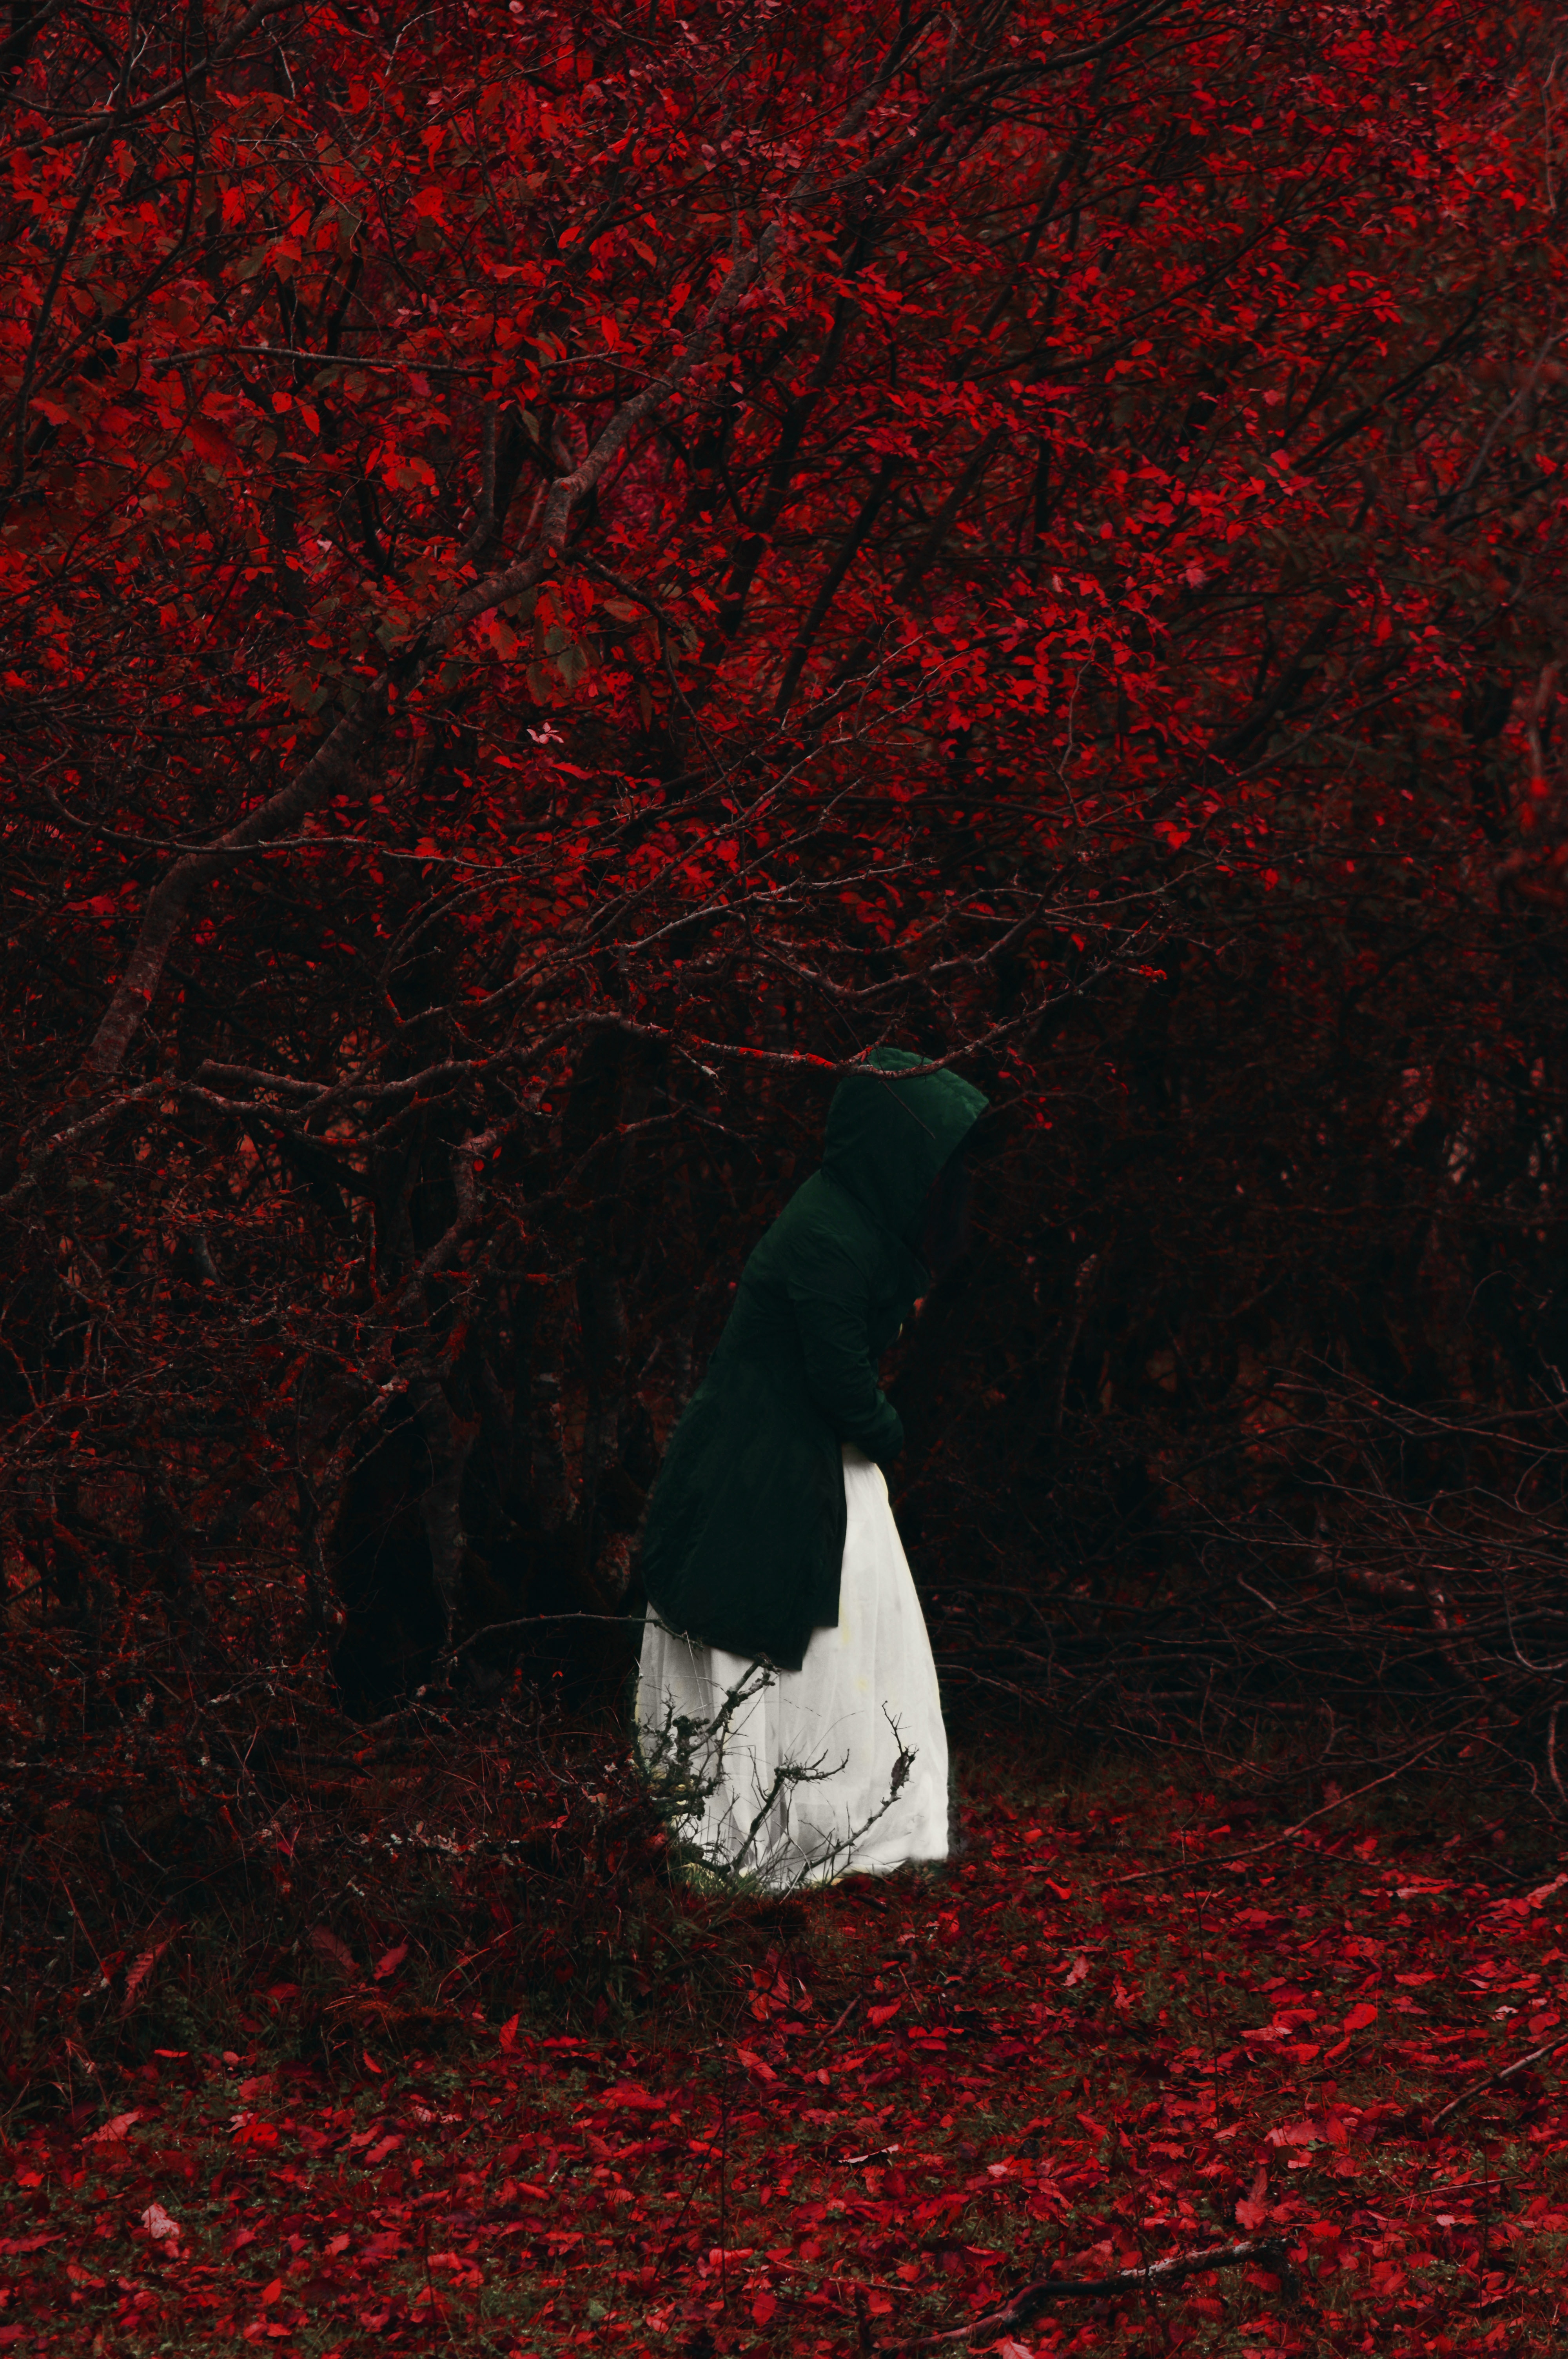 android hood, nature, autumn, red, forest, foliage, human, person, loneliness, alone, lonely